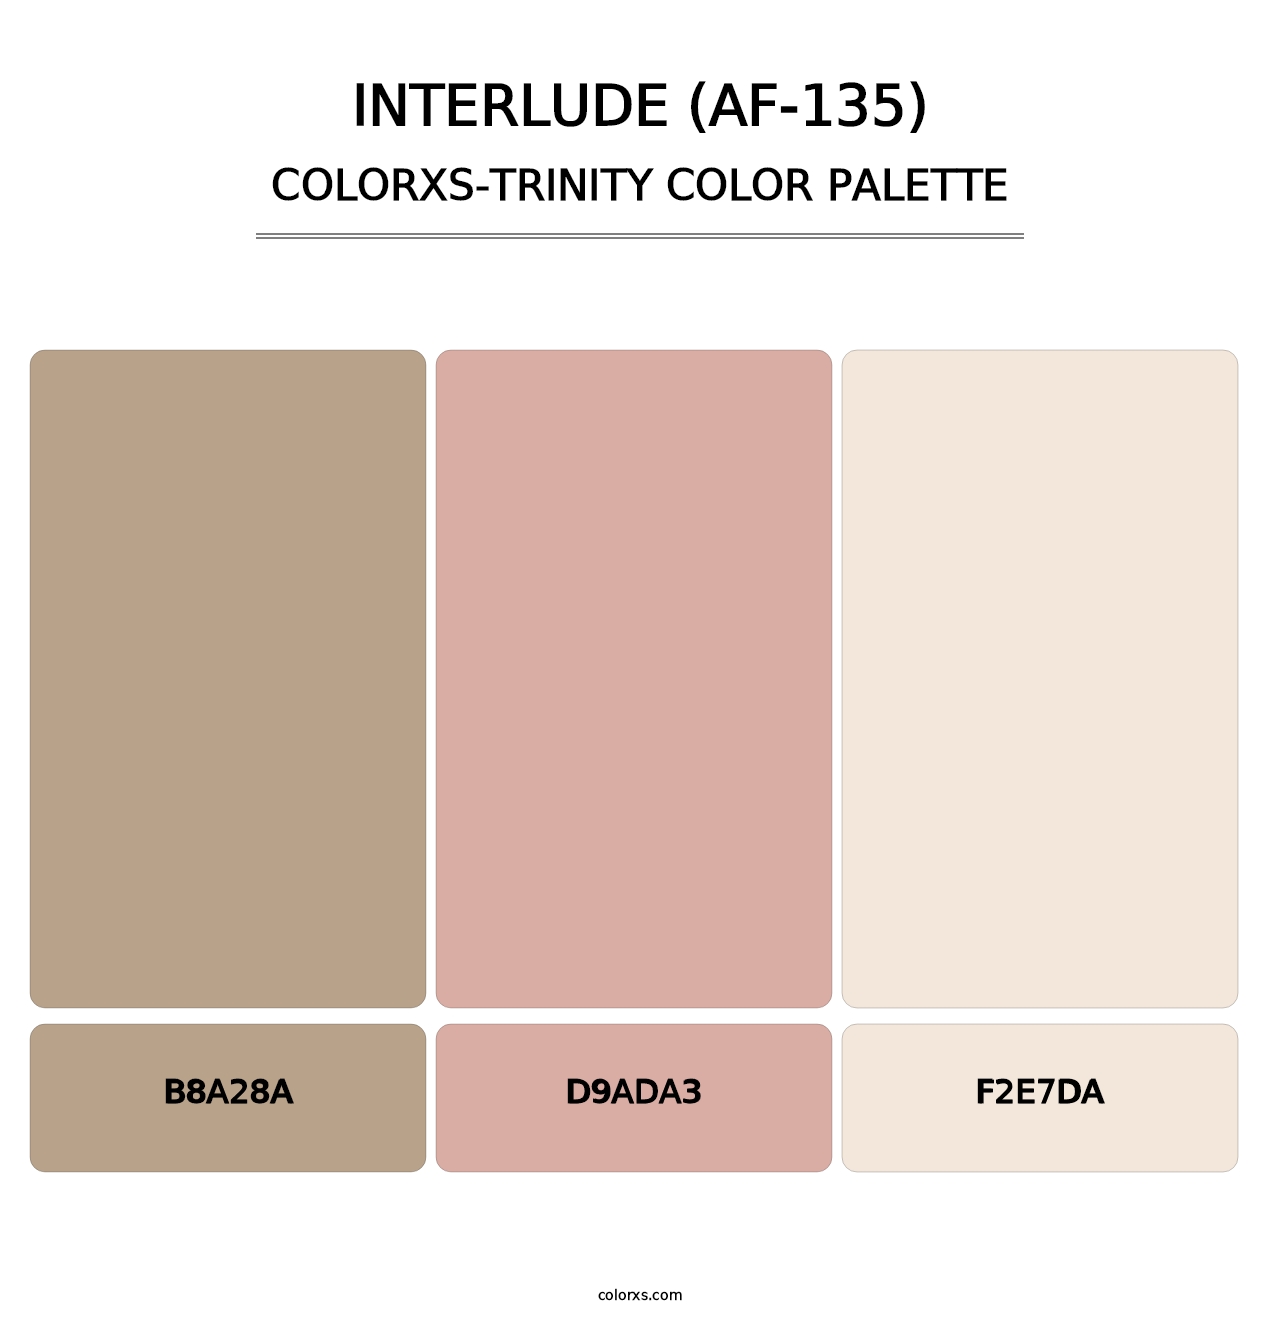 Interlude (AF-135) - Colorxs Trinity Palette